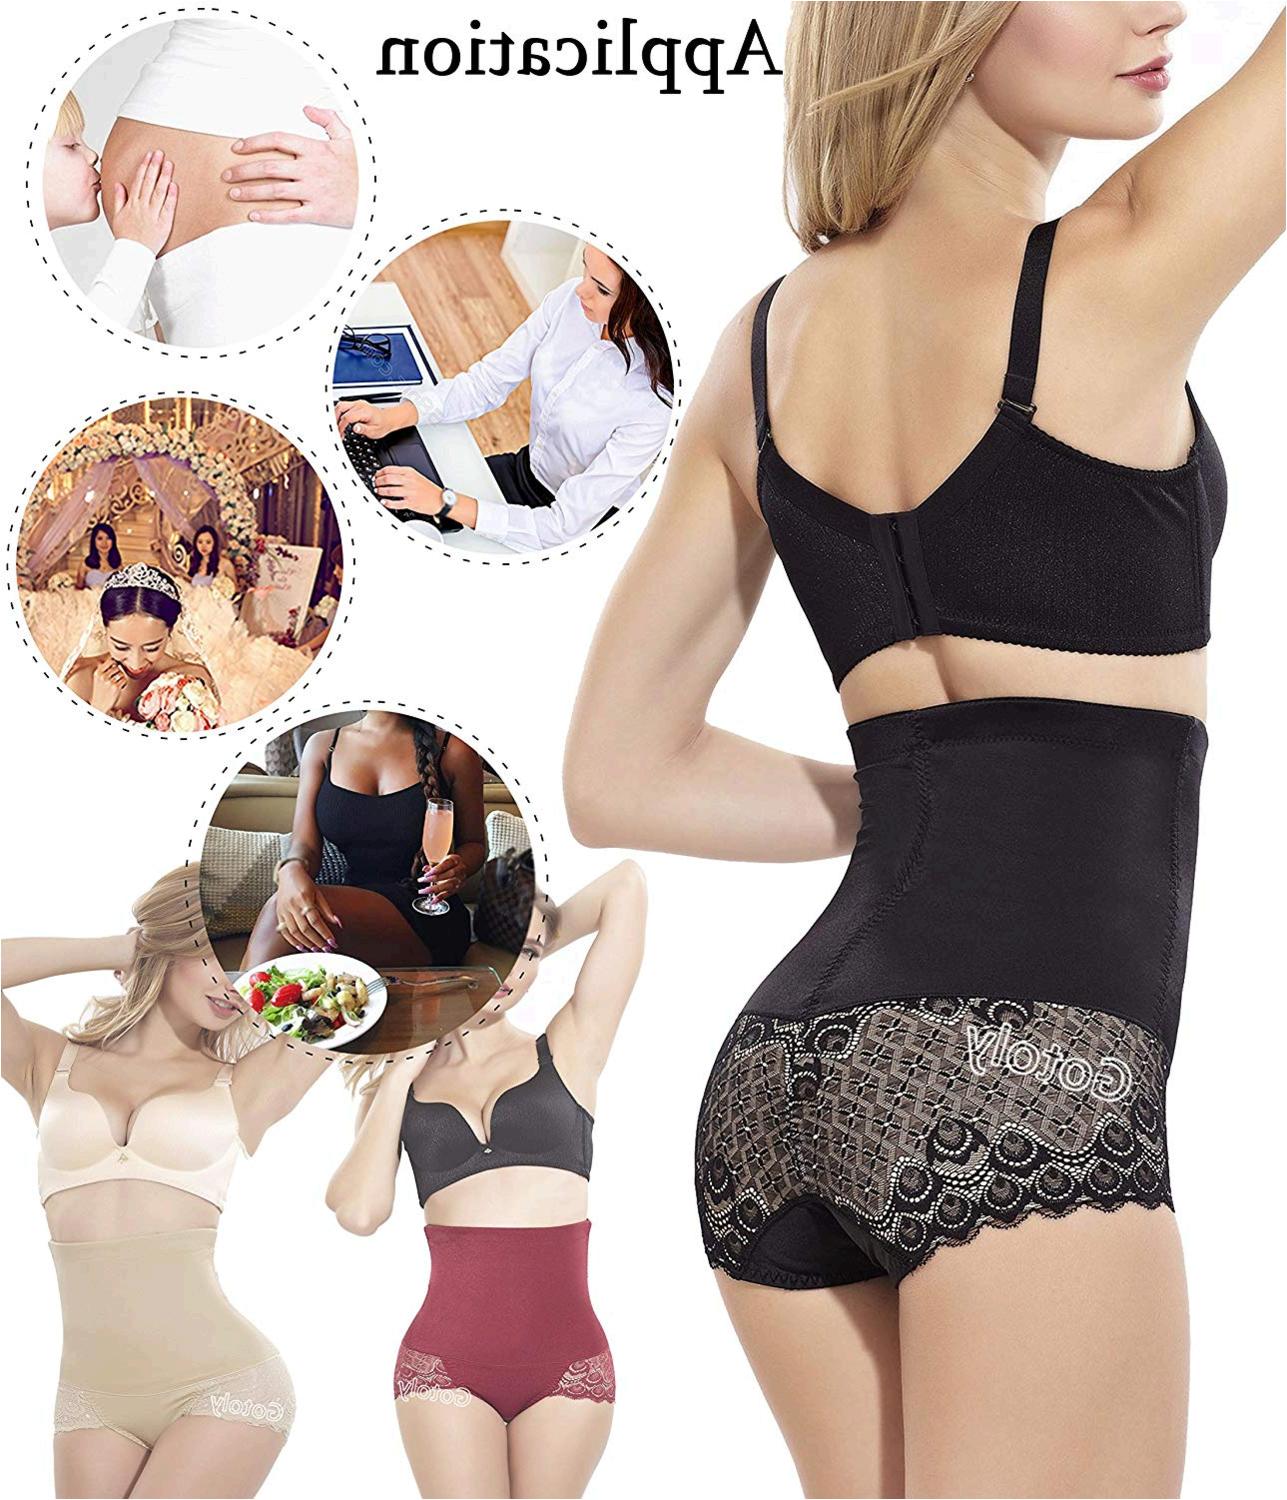 Gotoly Invisable Strapless Body Shaper High Waist Tummy Control Butt Lifter Panty Slim